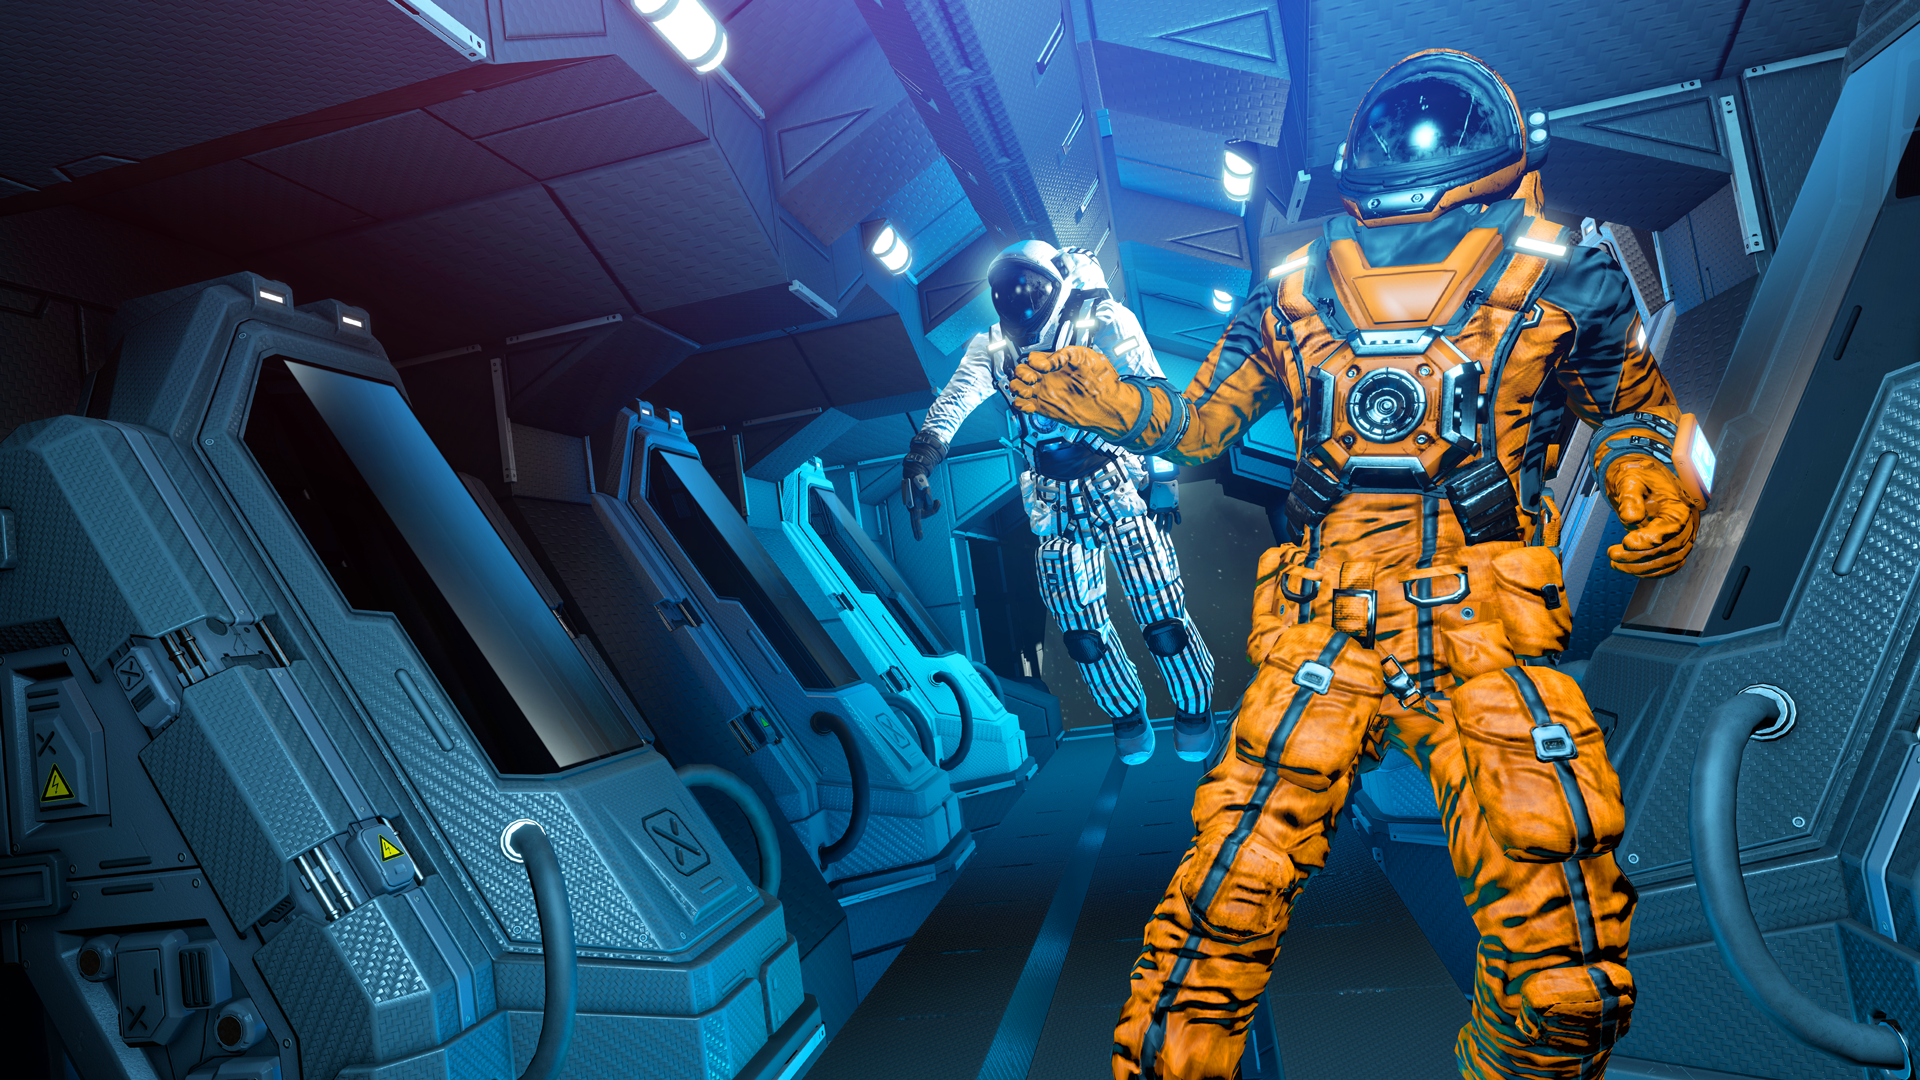 HD wallpaper of space engineers in futuristic space station interior for desktop background.